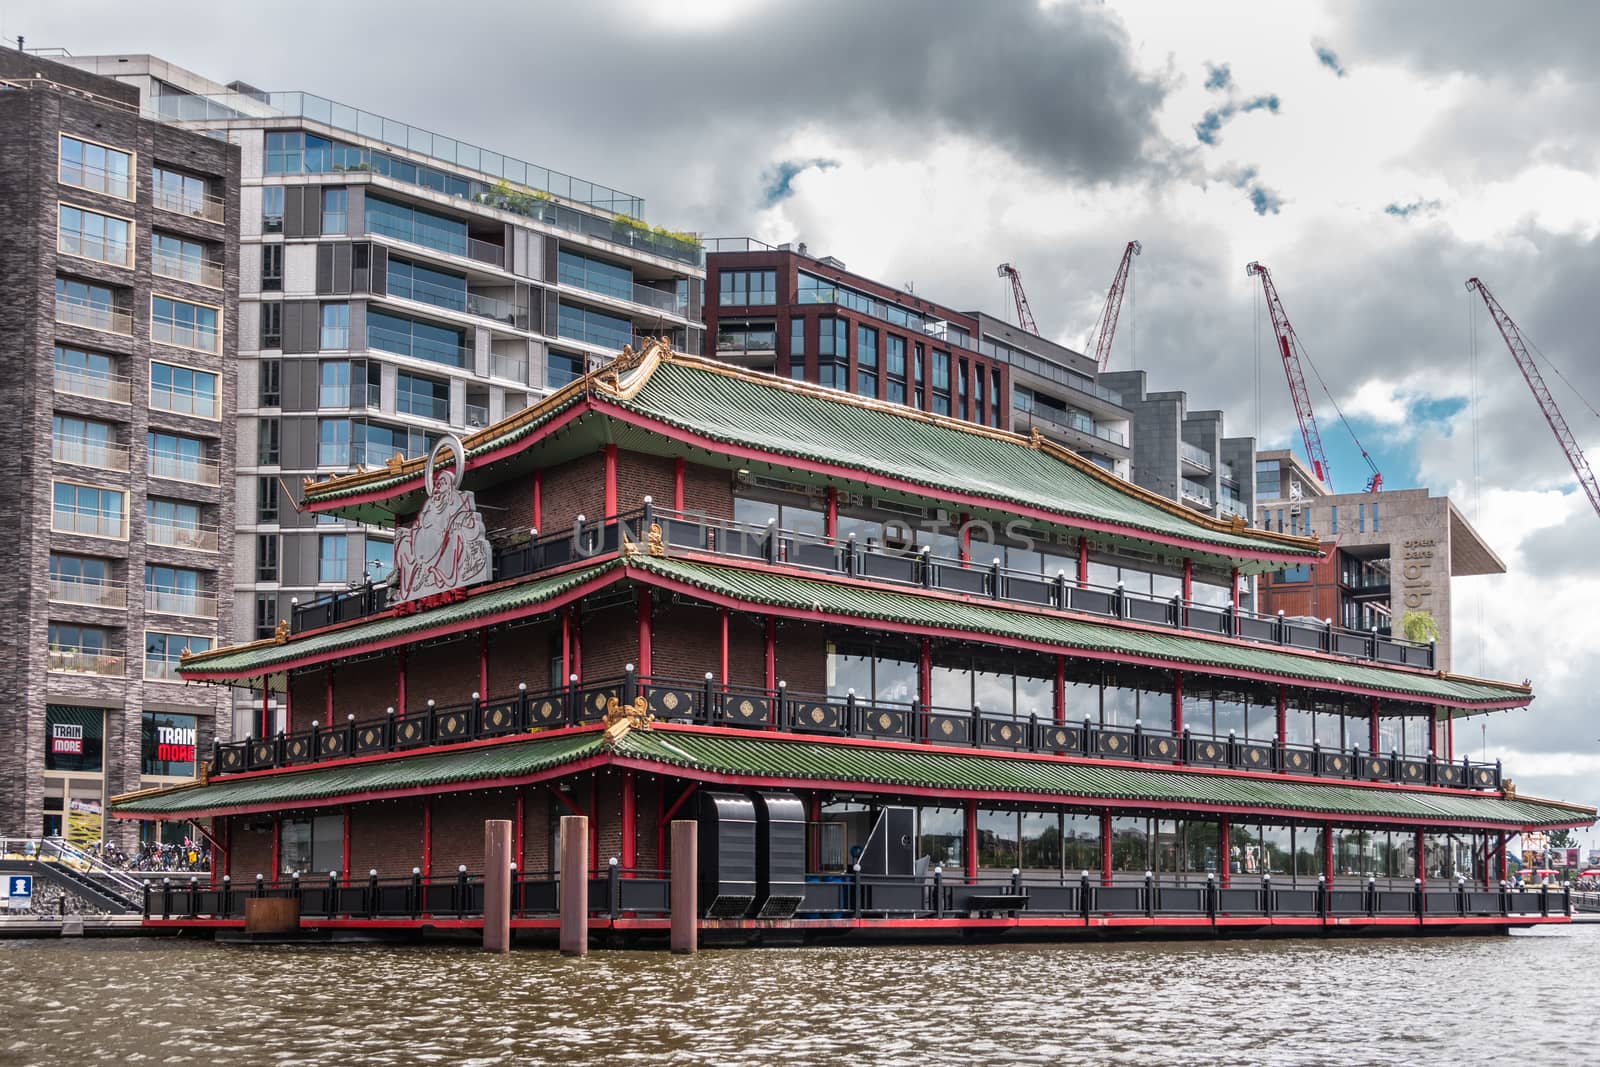 Amsterdam, the Netherlands - July 1, 2019: Red-green-brown long facade with huge white Buddha statue of Sea Palace floating restaurant at Oosterdokskade under heavy cloudscape.